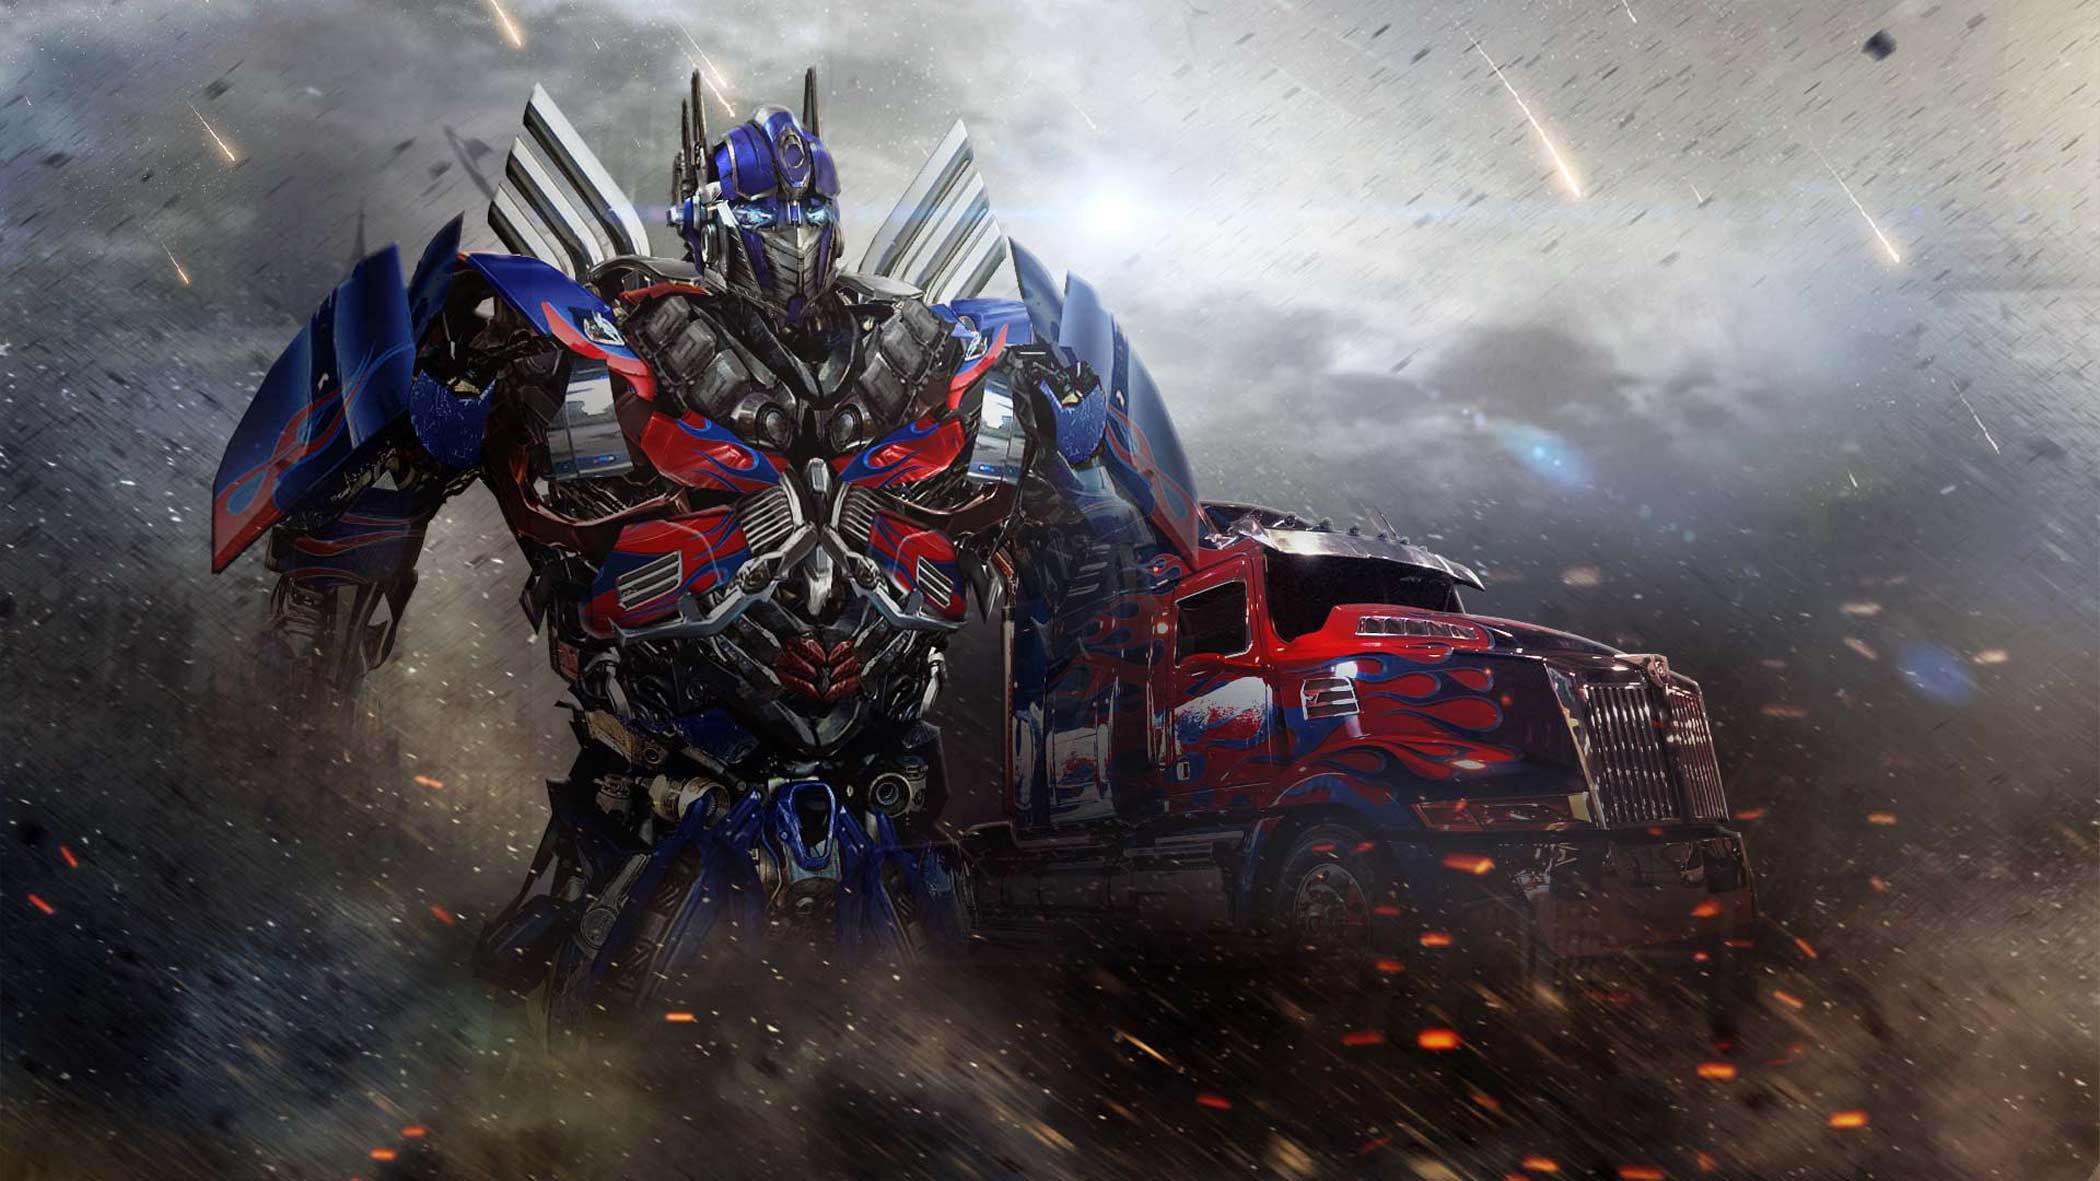 Transformers Wallpapers – – HD Wallpapers Adorable Wallpapers Pinterest Hd wallpaper and Wallpaper